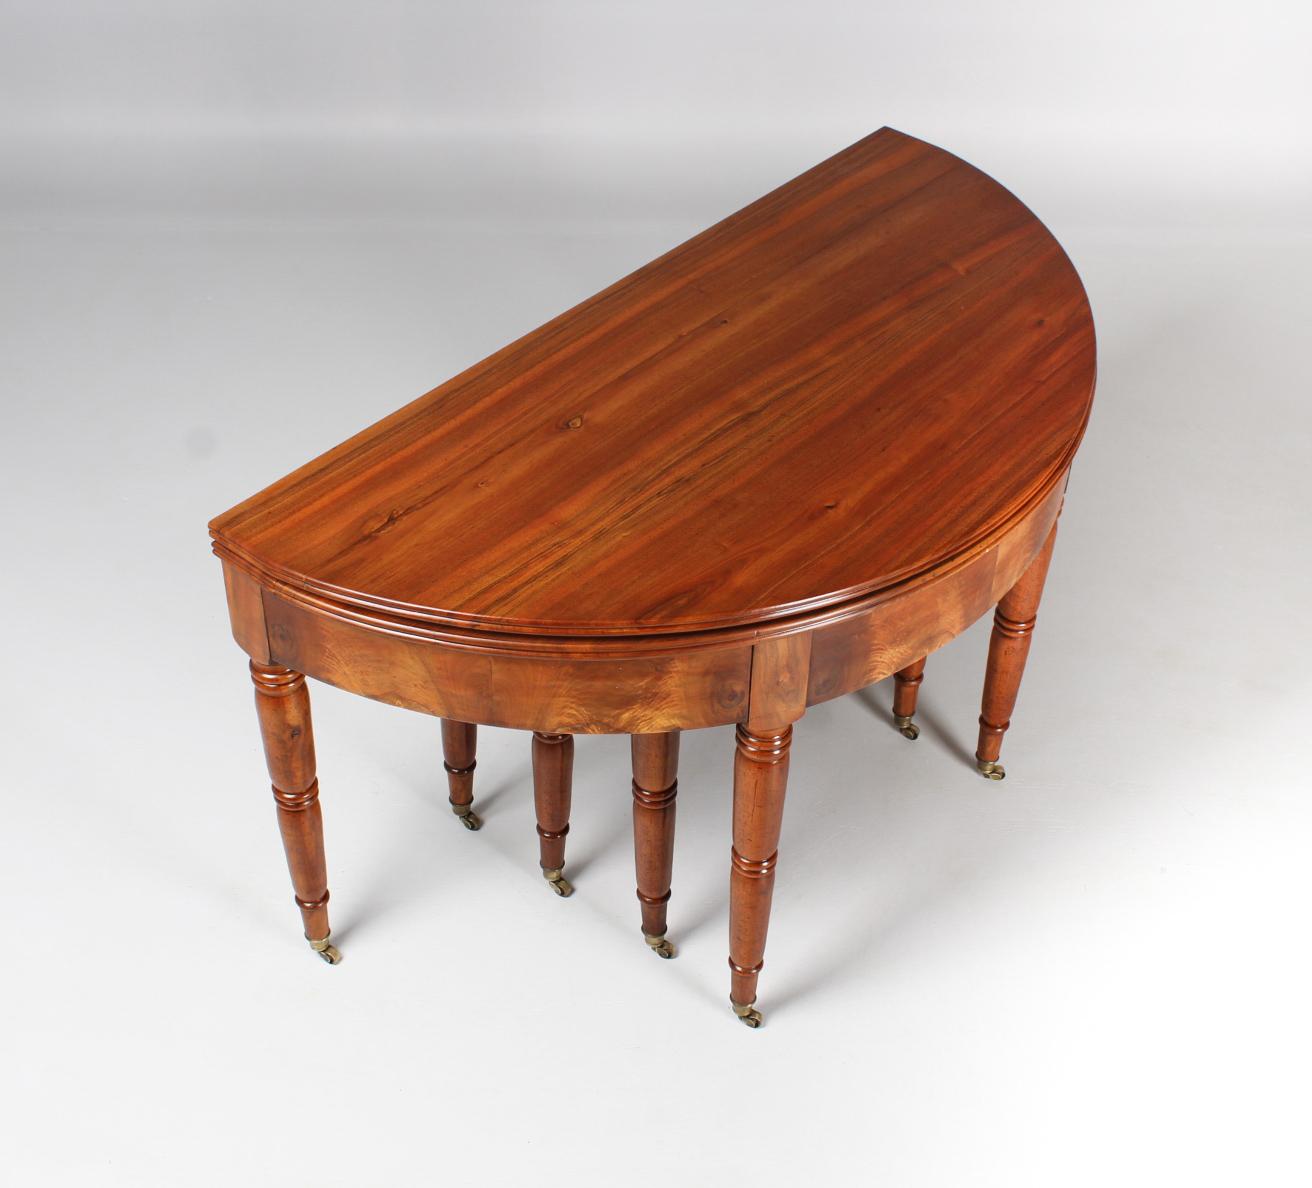 French Large 19th Century Dining Table, Walnut, 12-16 People